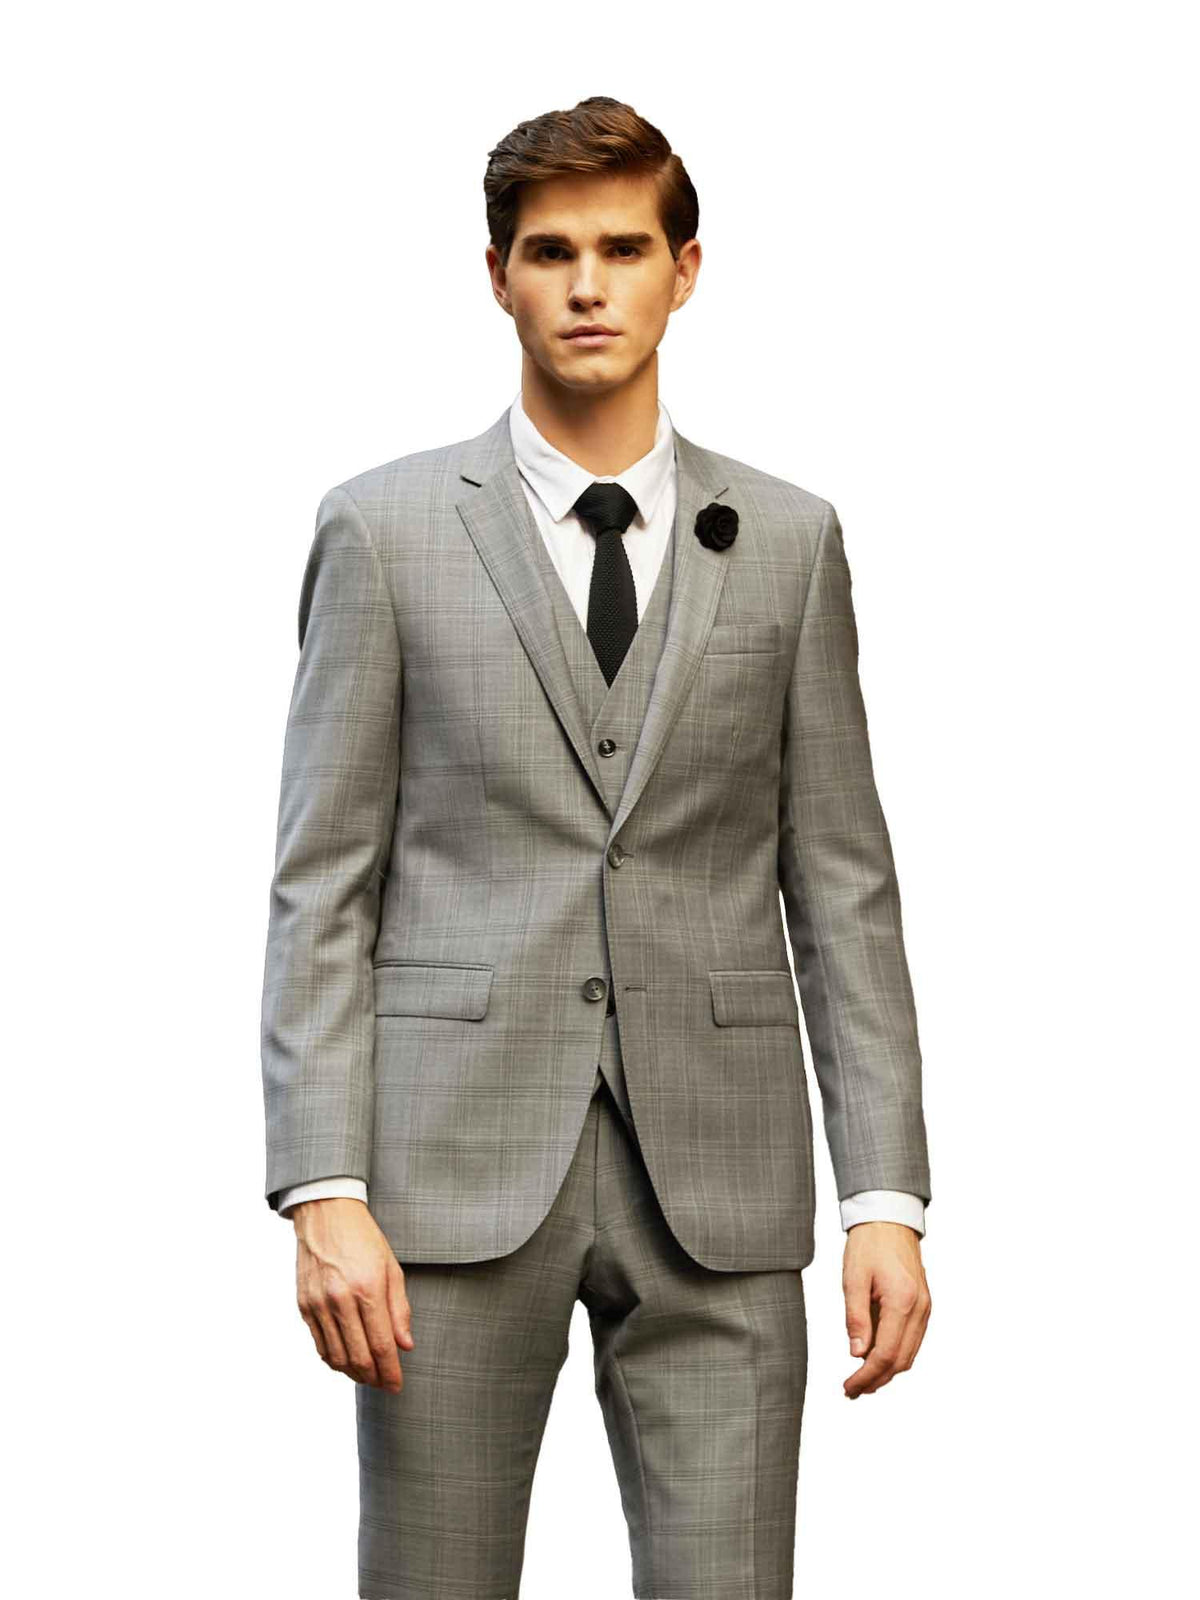 FW6-Silver Check Signature Suit Jacket - Harrys for Menswear